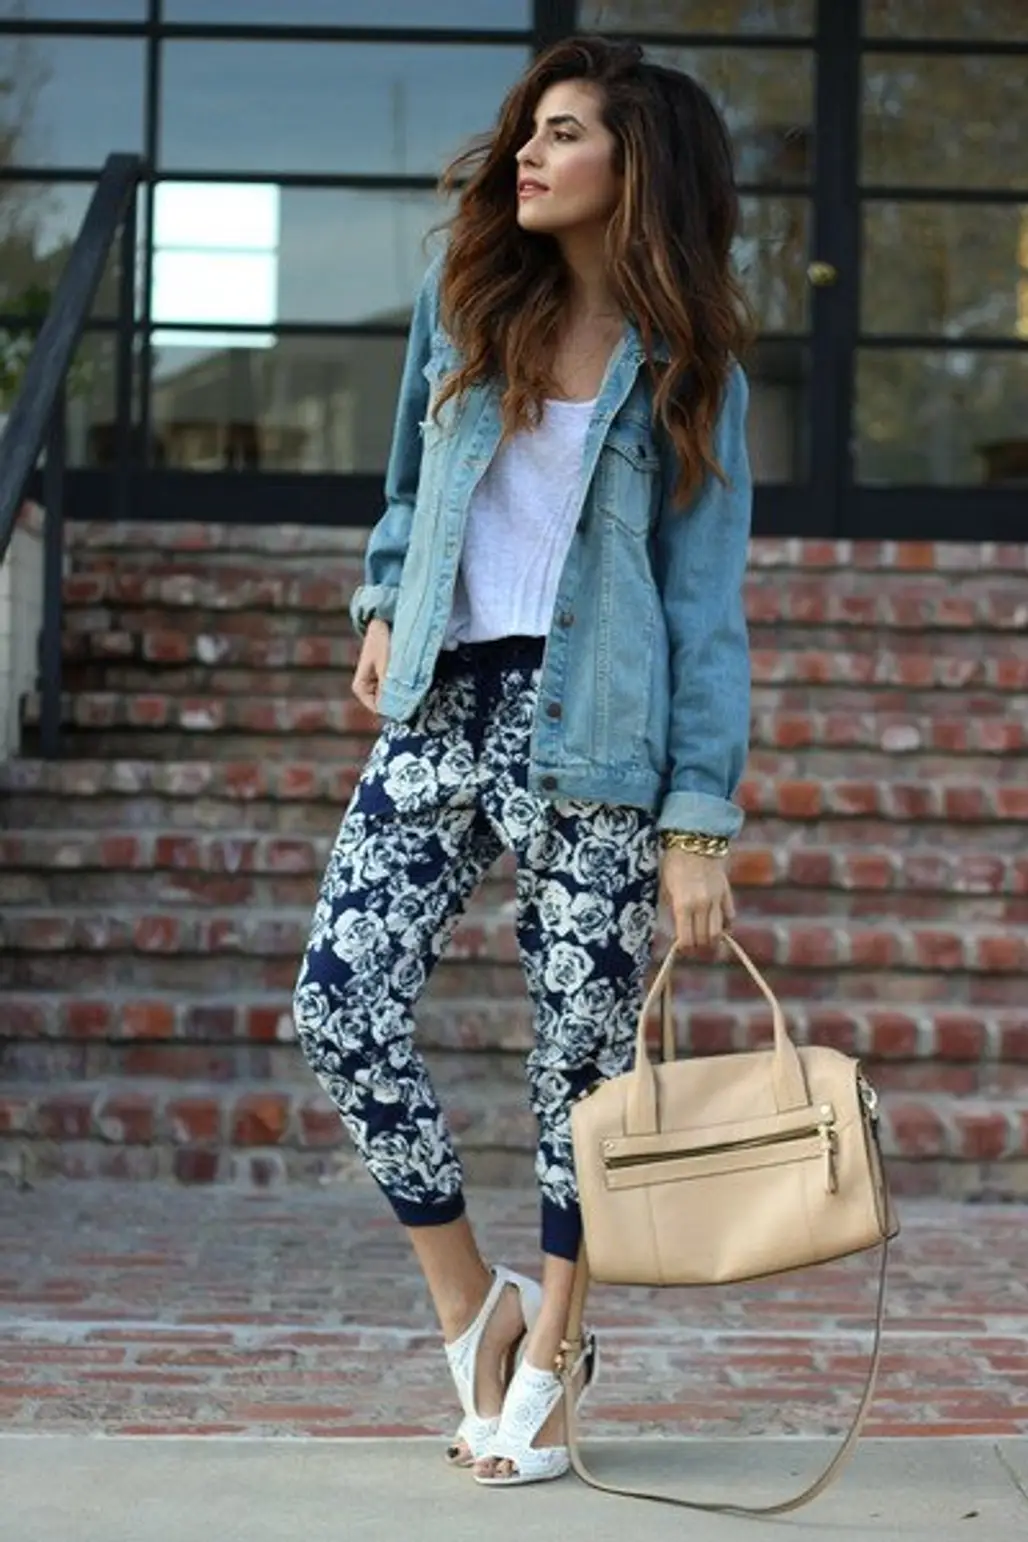 Patterned Track Pants with a Jean Jacket